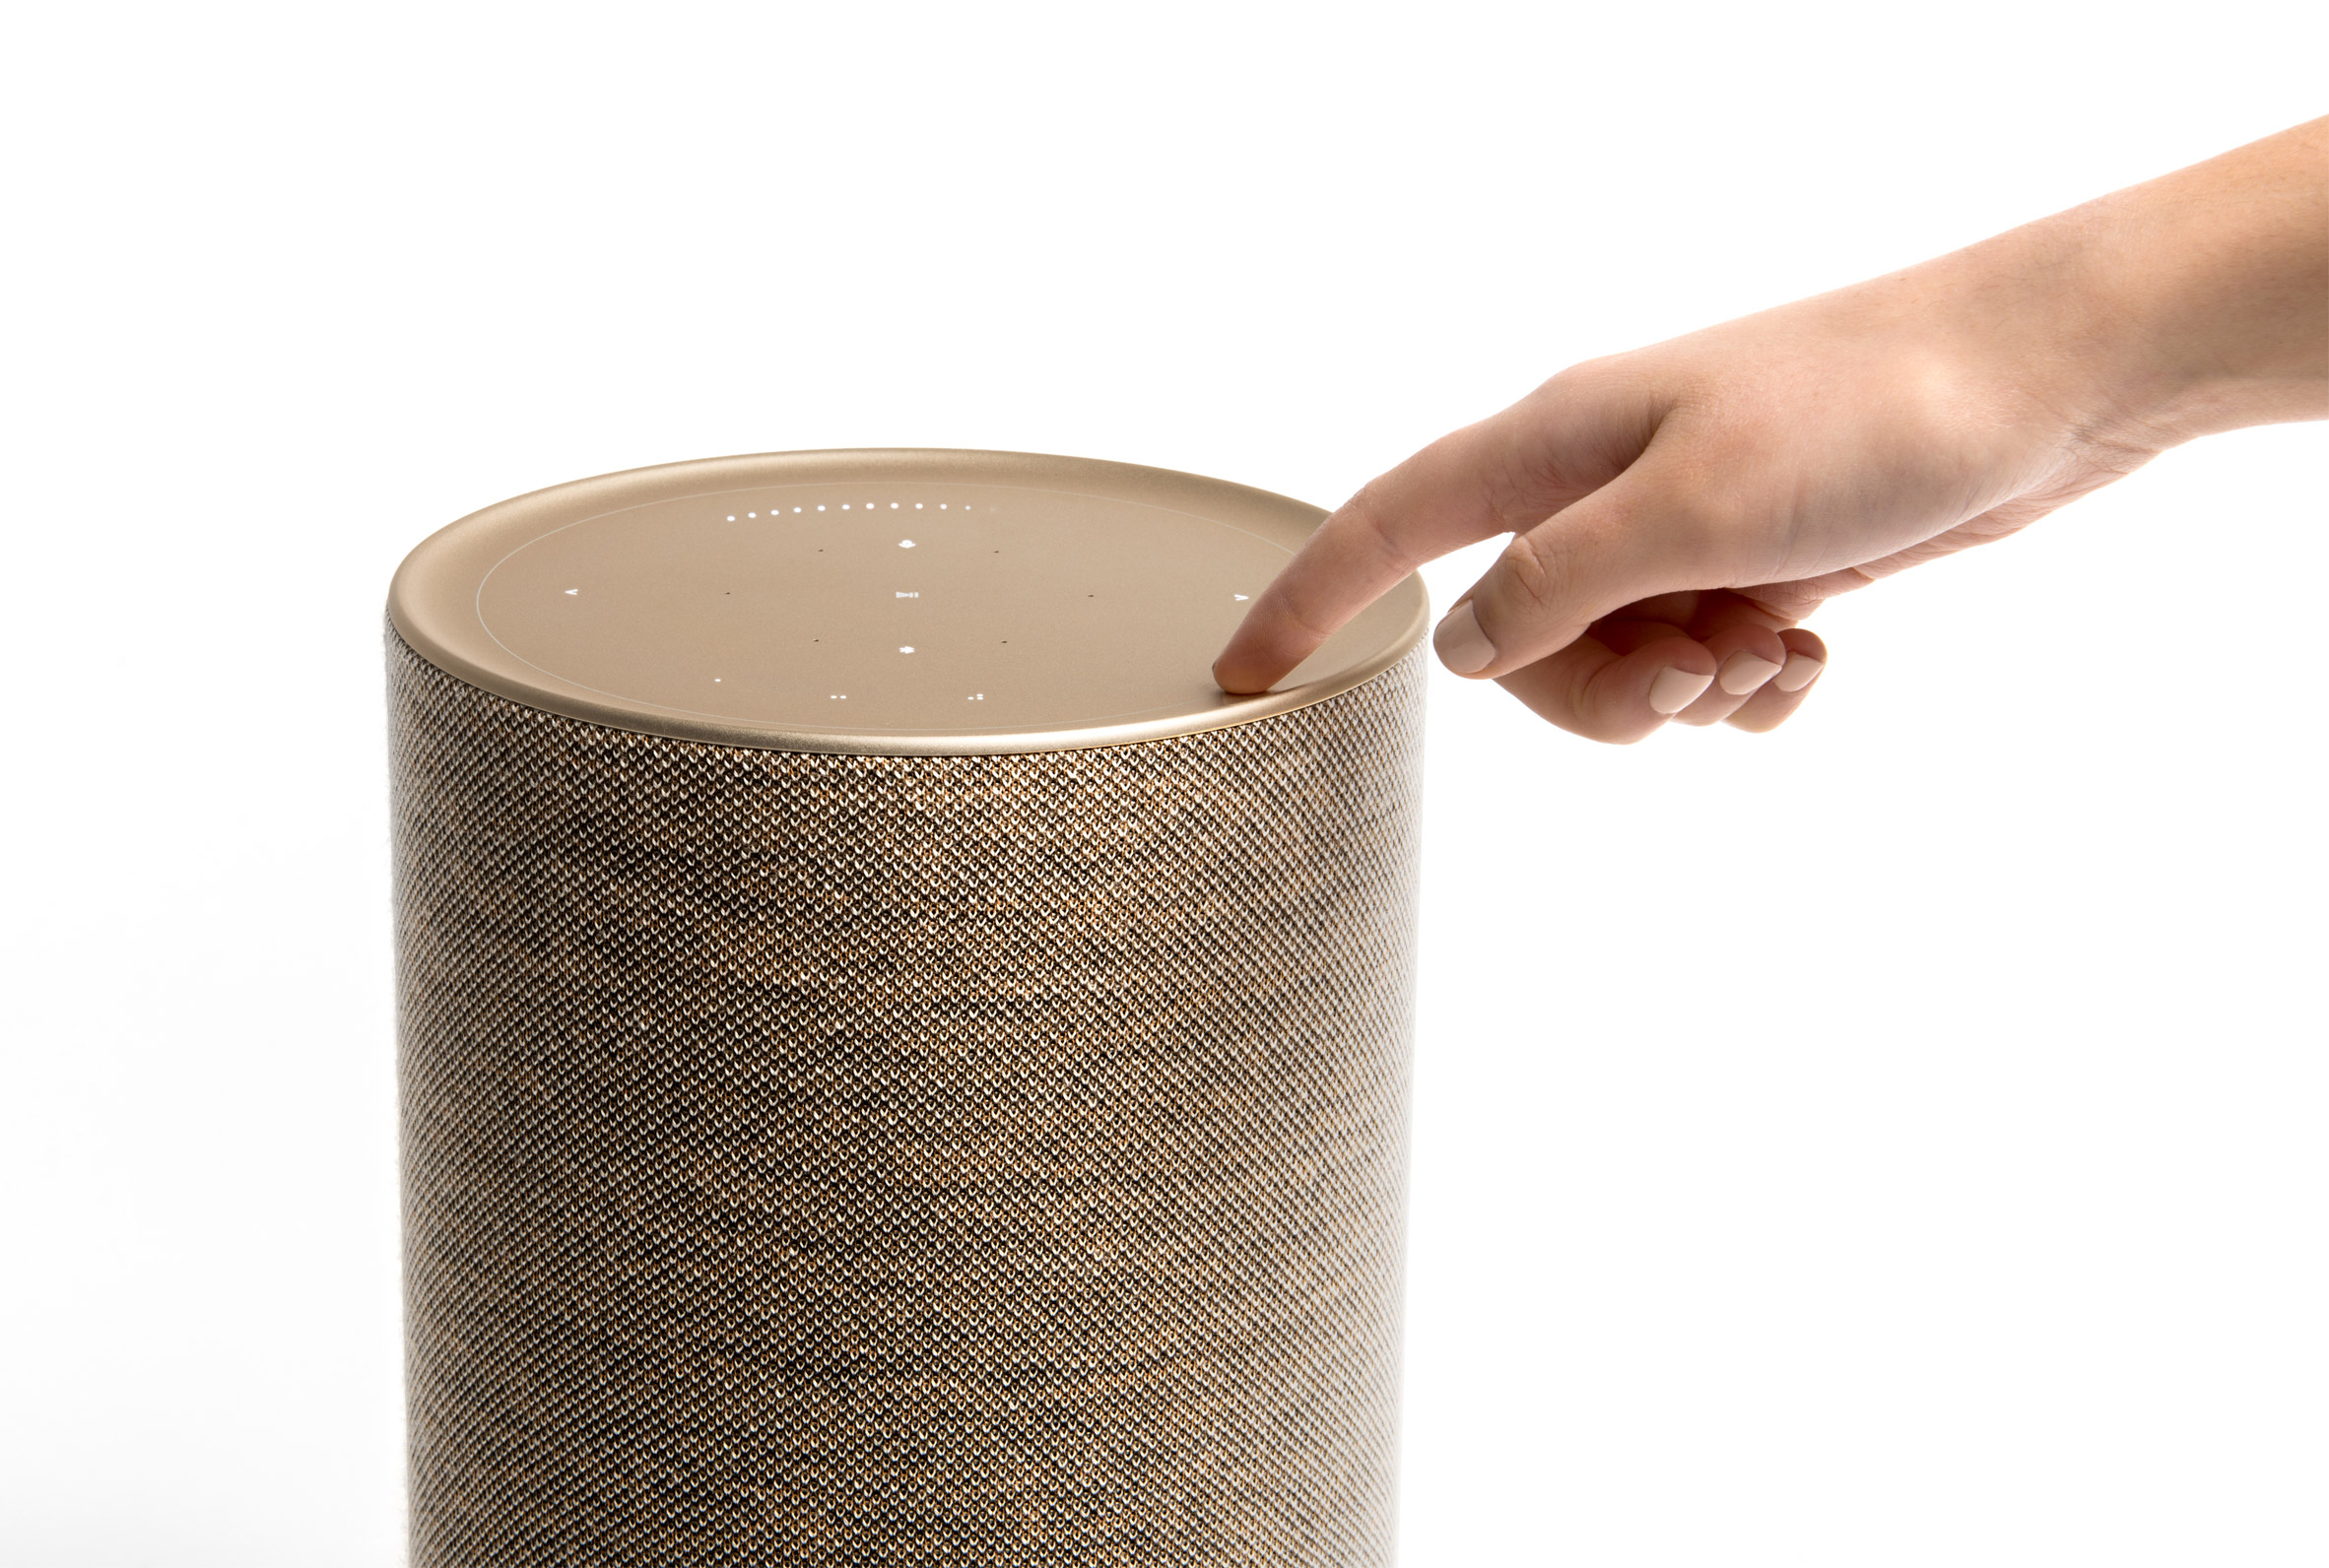 Layer designs Bang & Olufsen speaker that "visually describes how the audio functions"